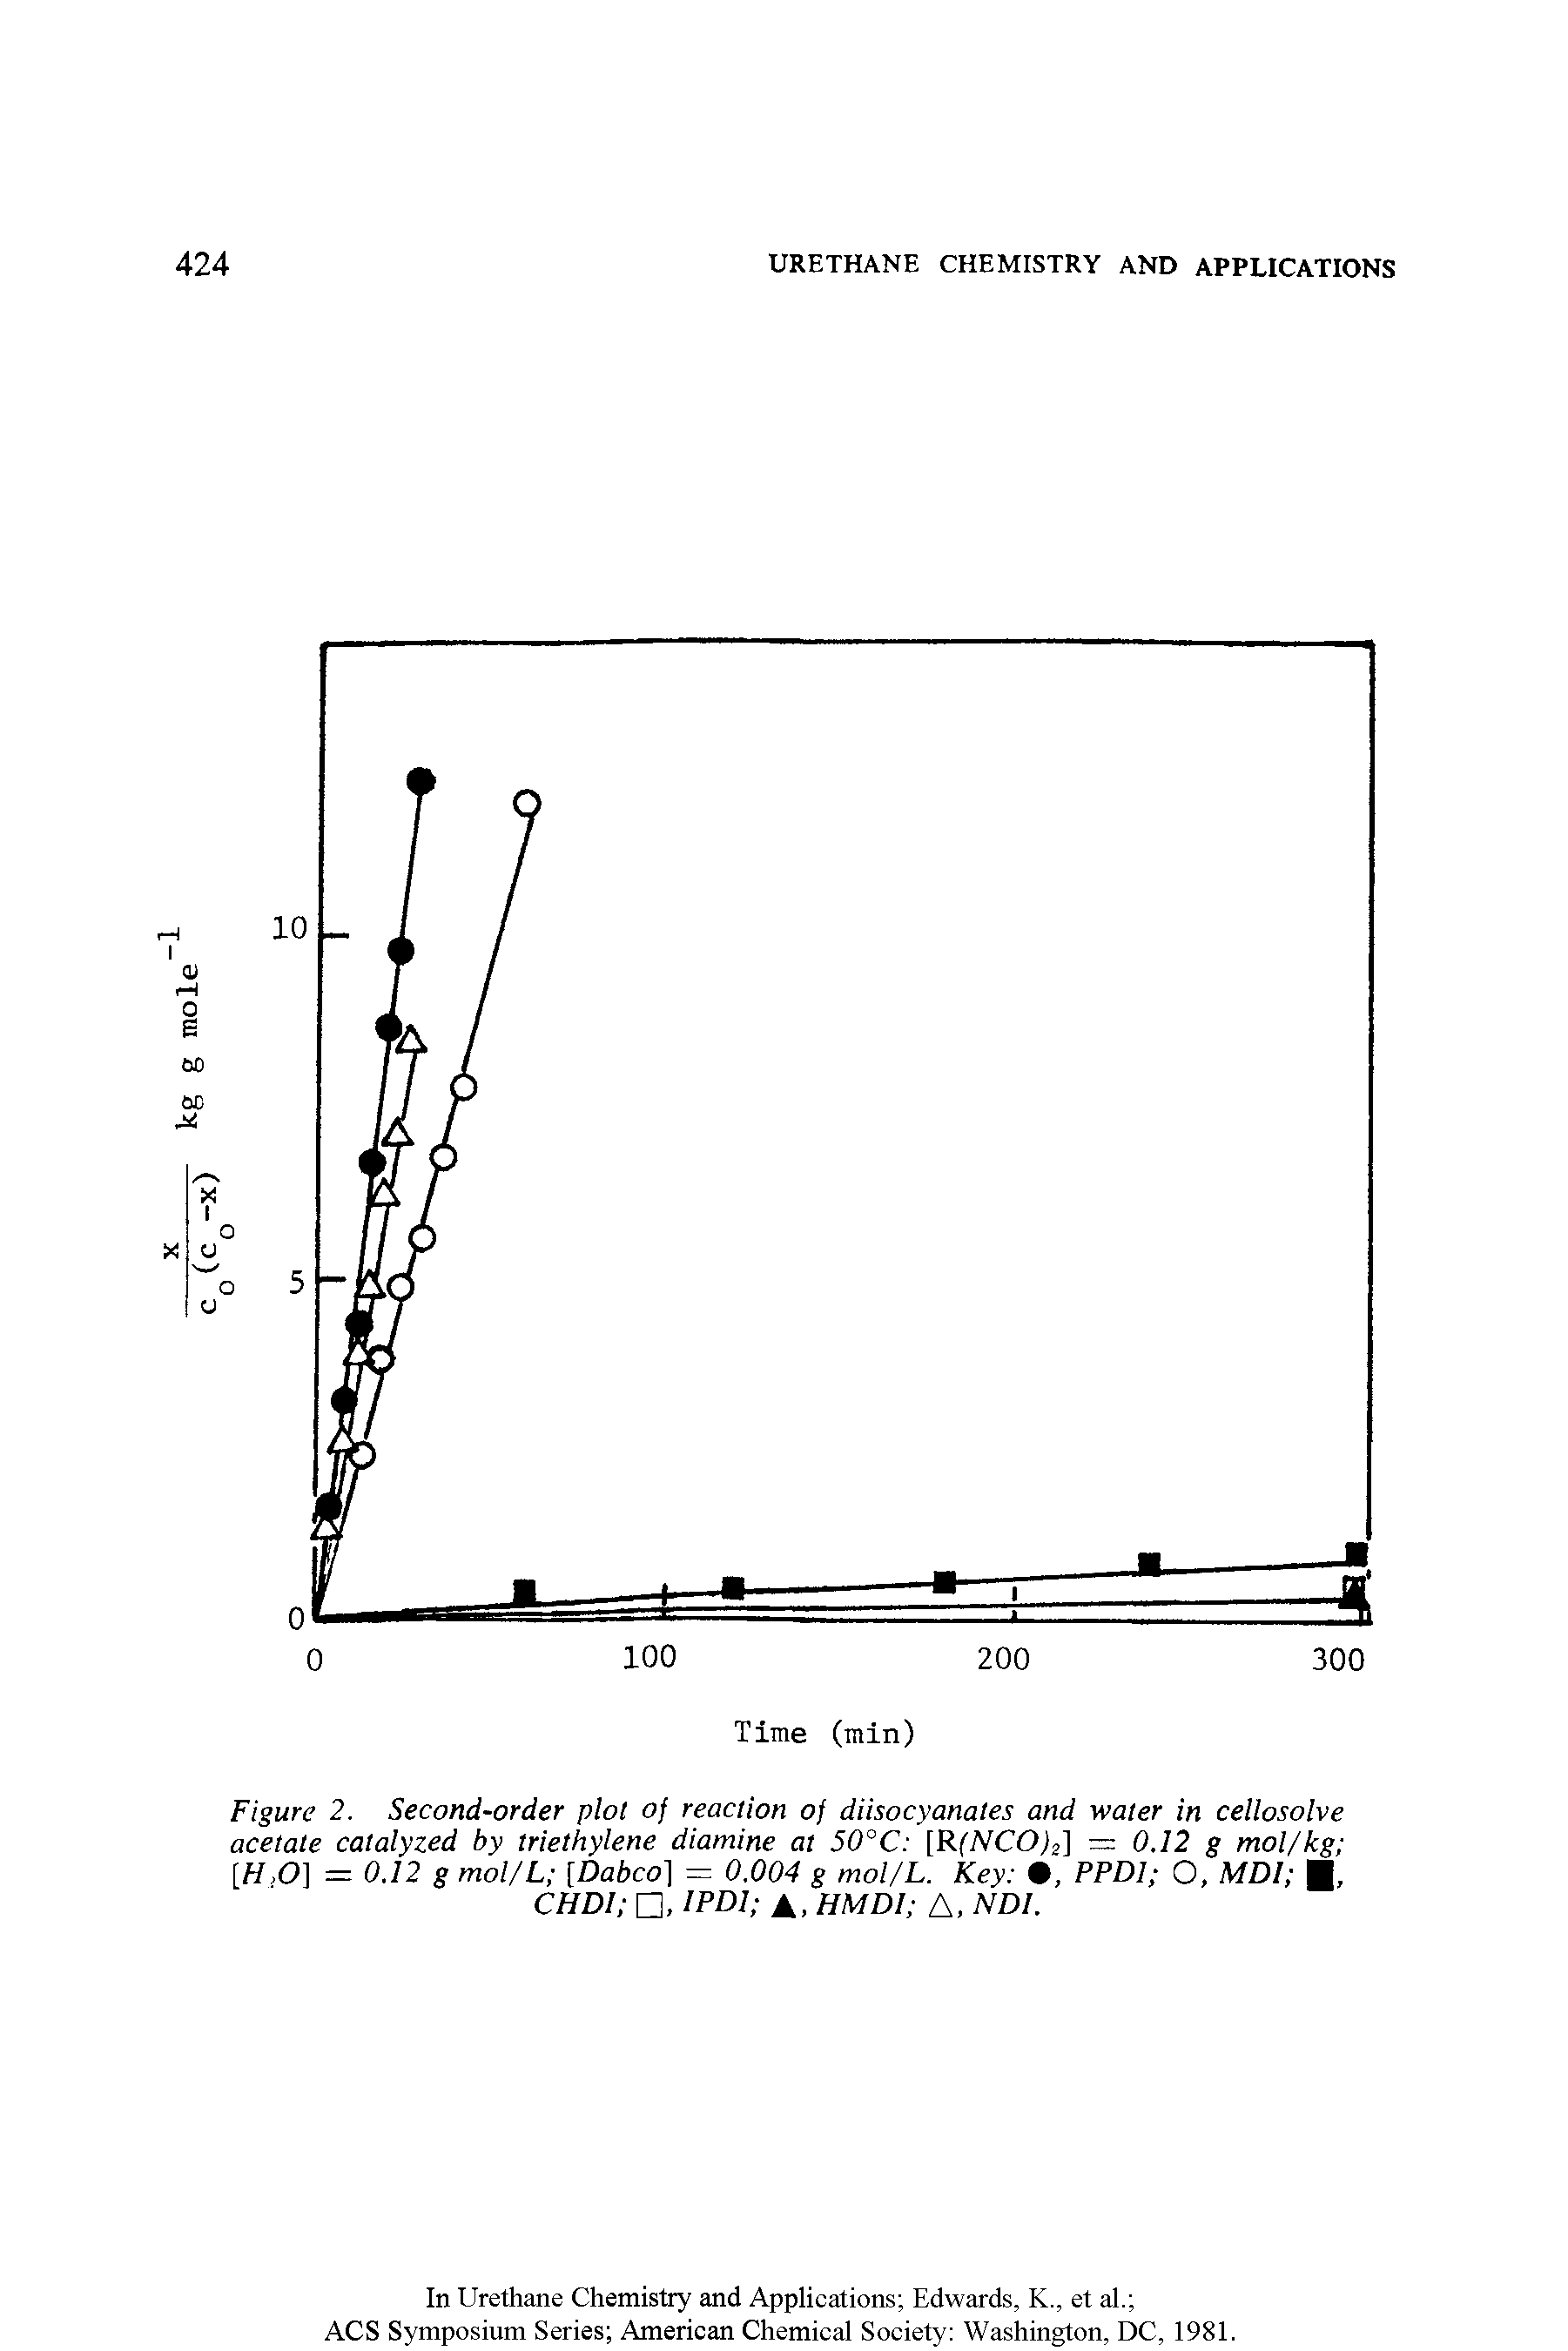 Figure 2. Second-order plot of reaction of diisocyanates and water in cellosolve acetate catalyzed by triethylene diamine at 50°C [RfNCO) .] = 0.12 g mol/kg [H,0] = 0.12 g mol/L [Dabco] = 0.004 g mol/L. Key , PPD1 O, MD1 CHDI , IPD1 A, HMDI A, NDI.